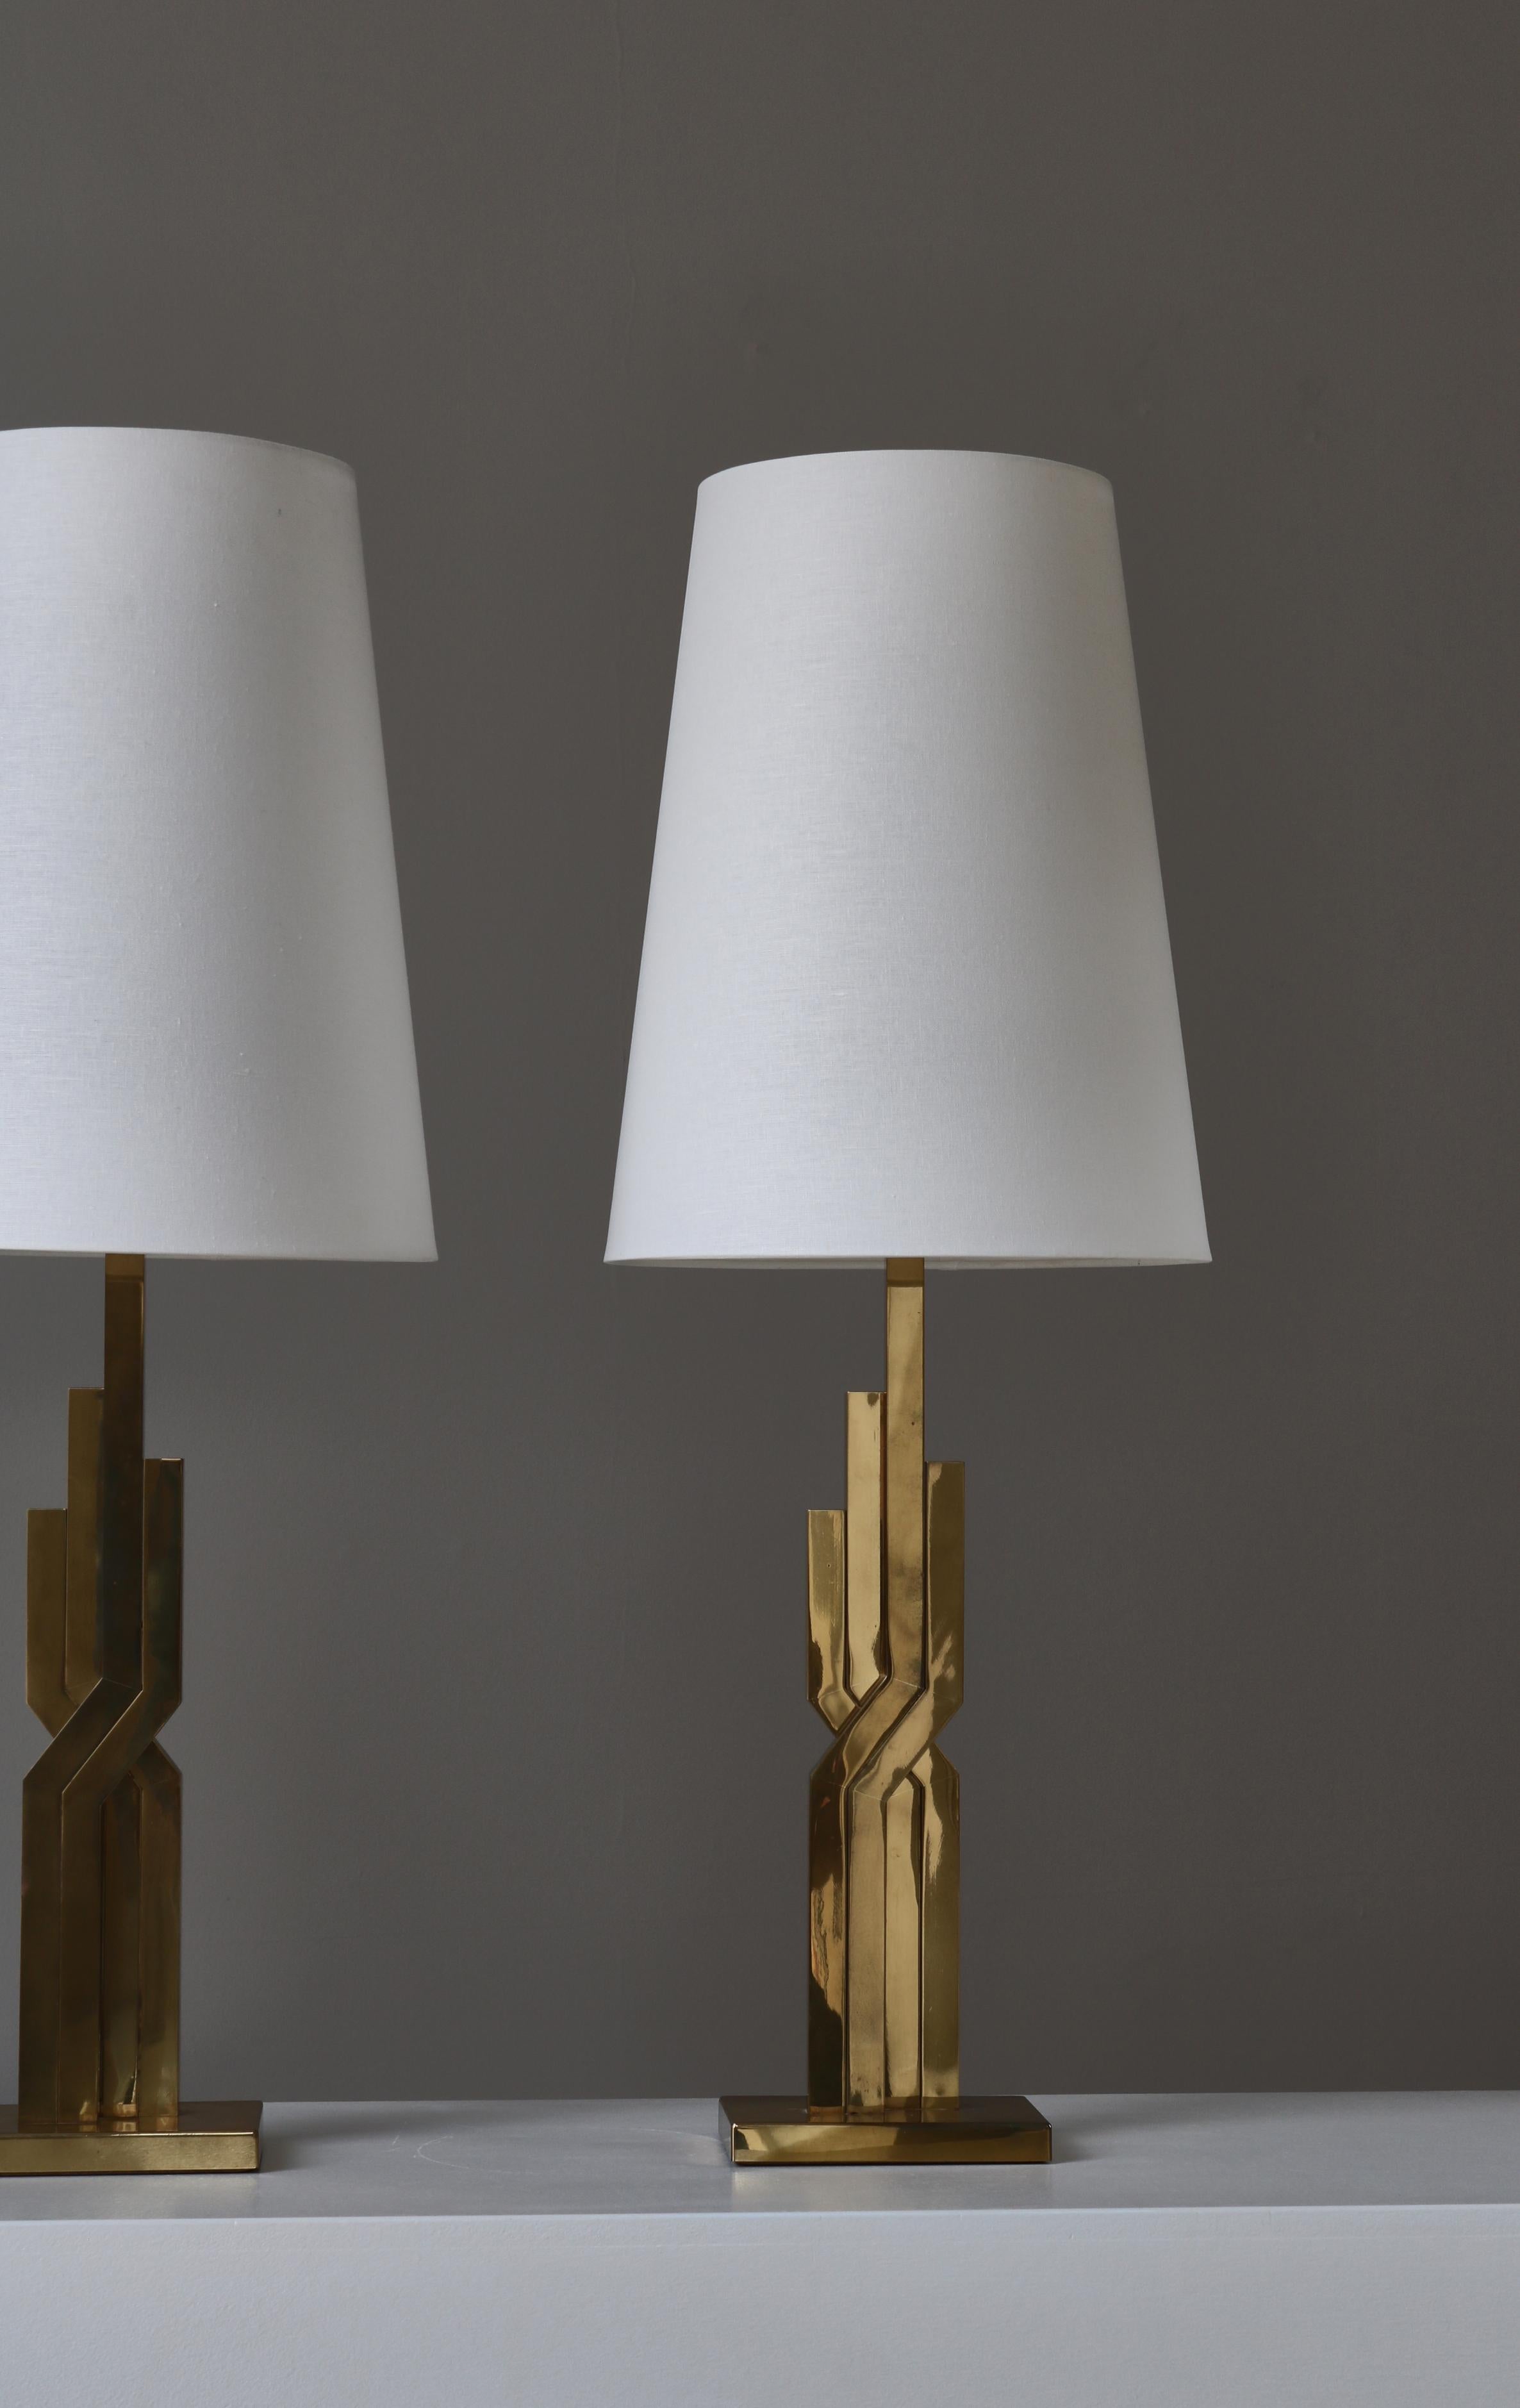 Large Danish Modern Table Lamps in Brass by Svend Aage Holm-Sørensen, 1960s For Sale 1